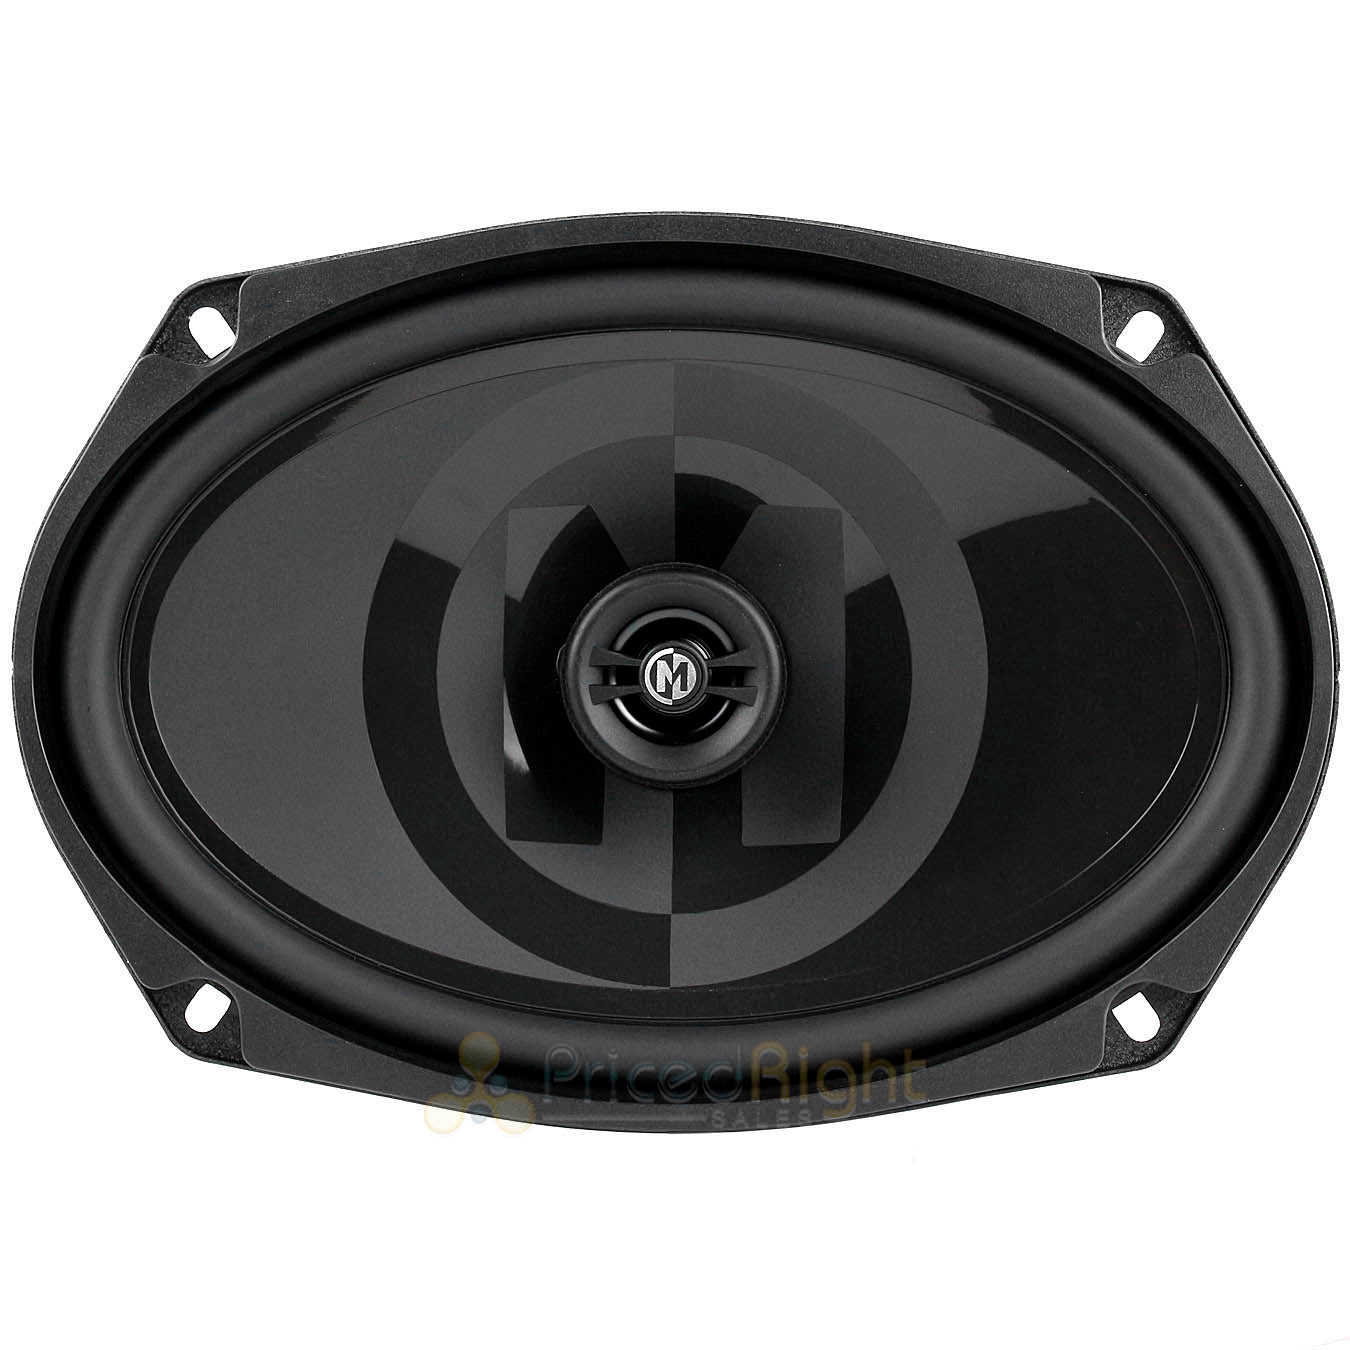 Memphis Audio 6x9" 2 Way Shallow Coaxial Speakers Power Reference 100W Max Pair